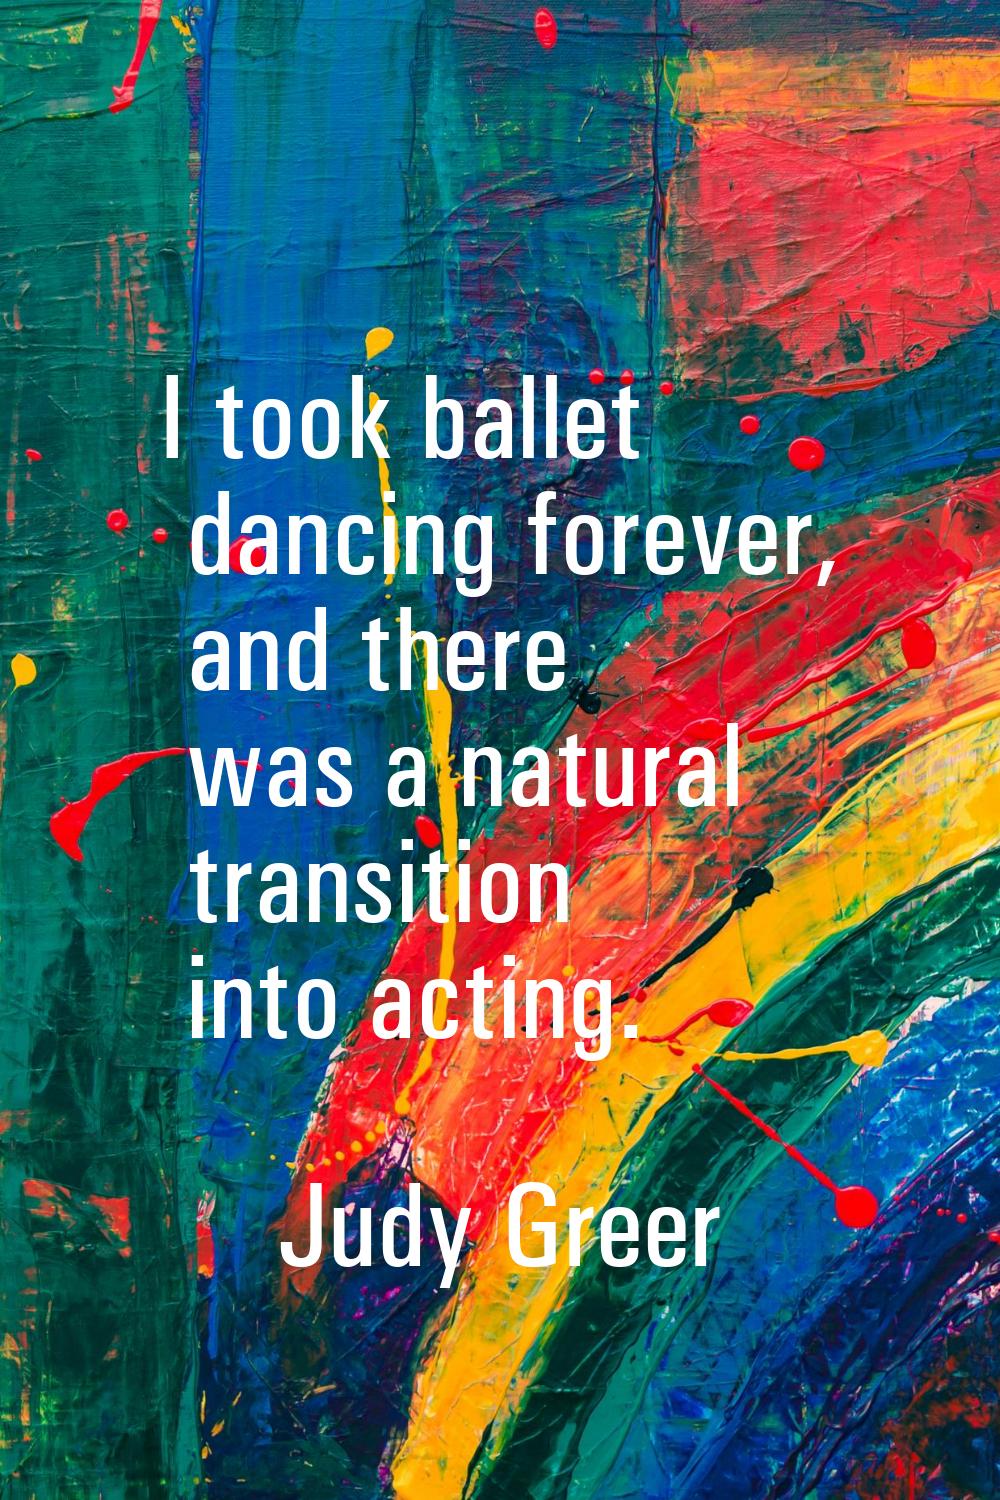 I took ballet dancing forever, and there was a natural transition into acting.